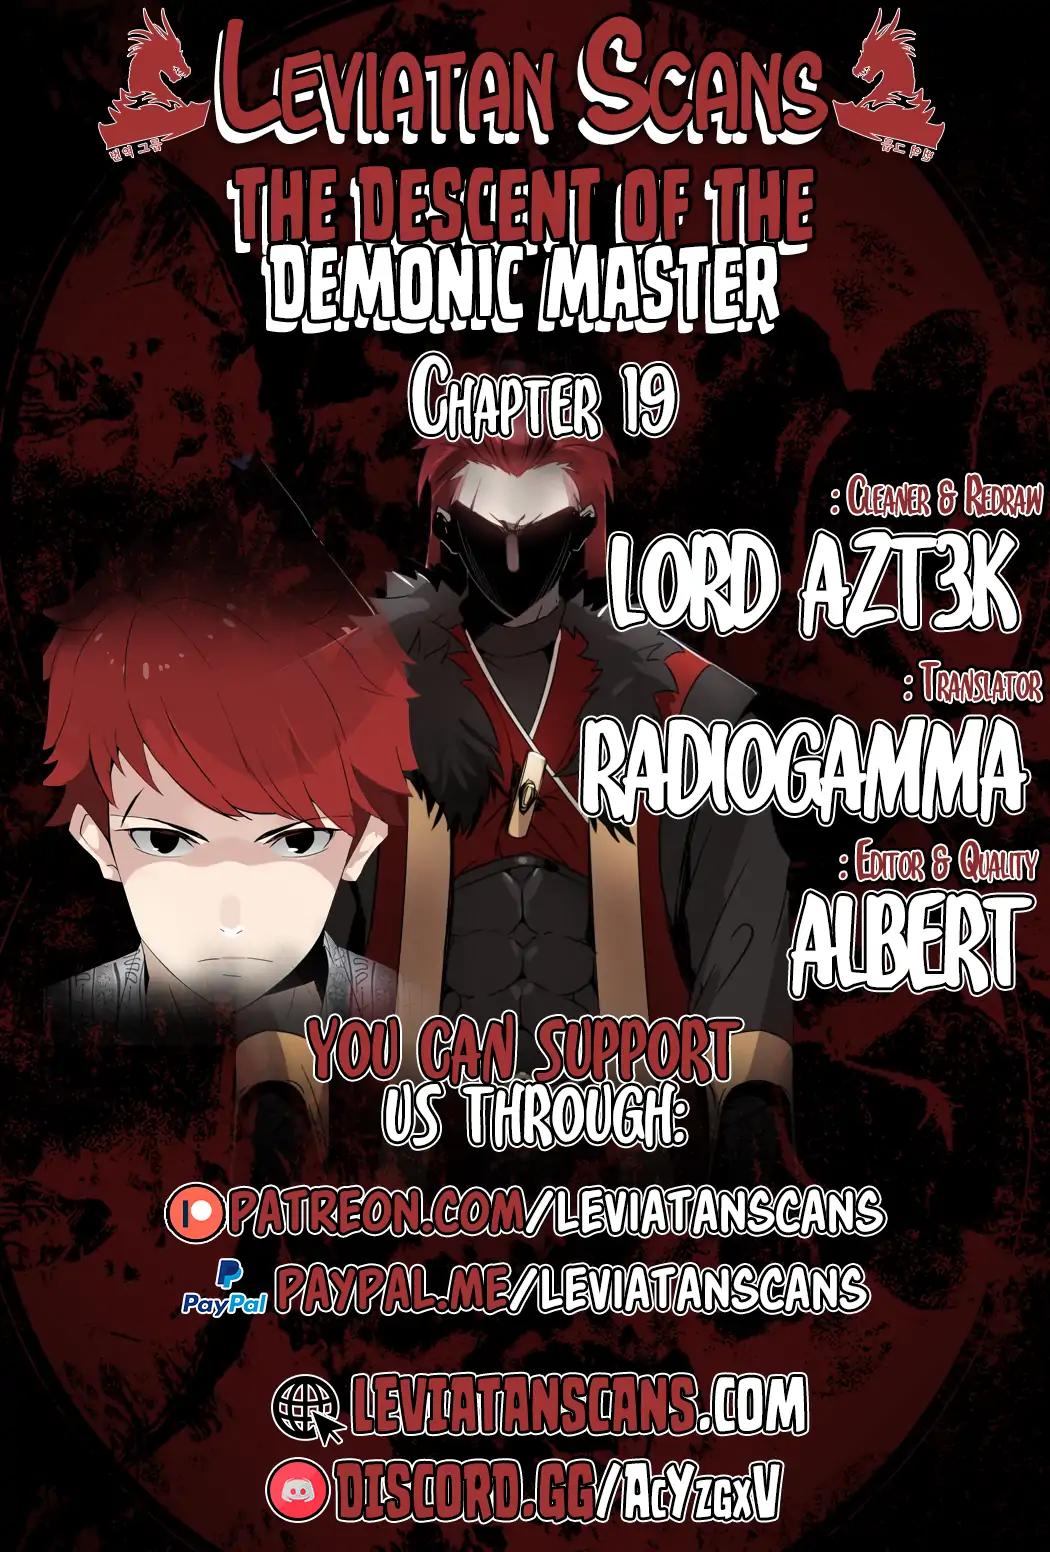 The Descent of the Demonic Master Chapter 19